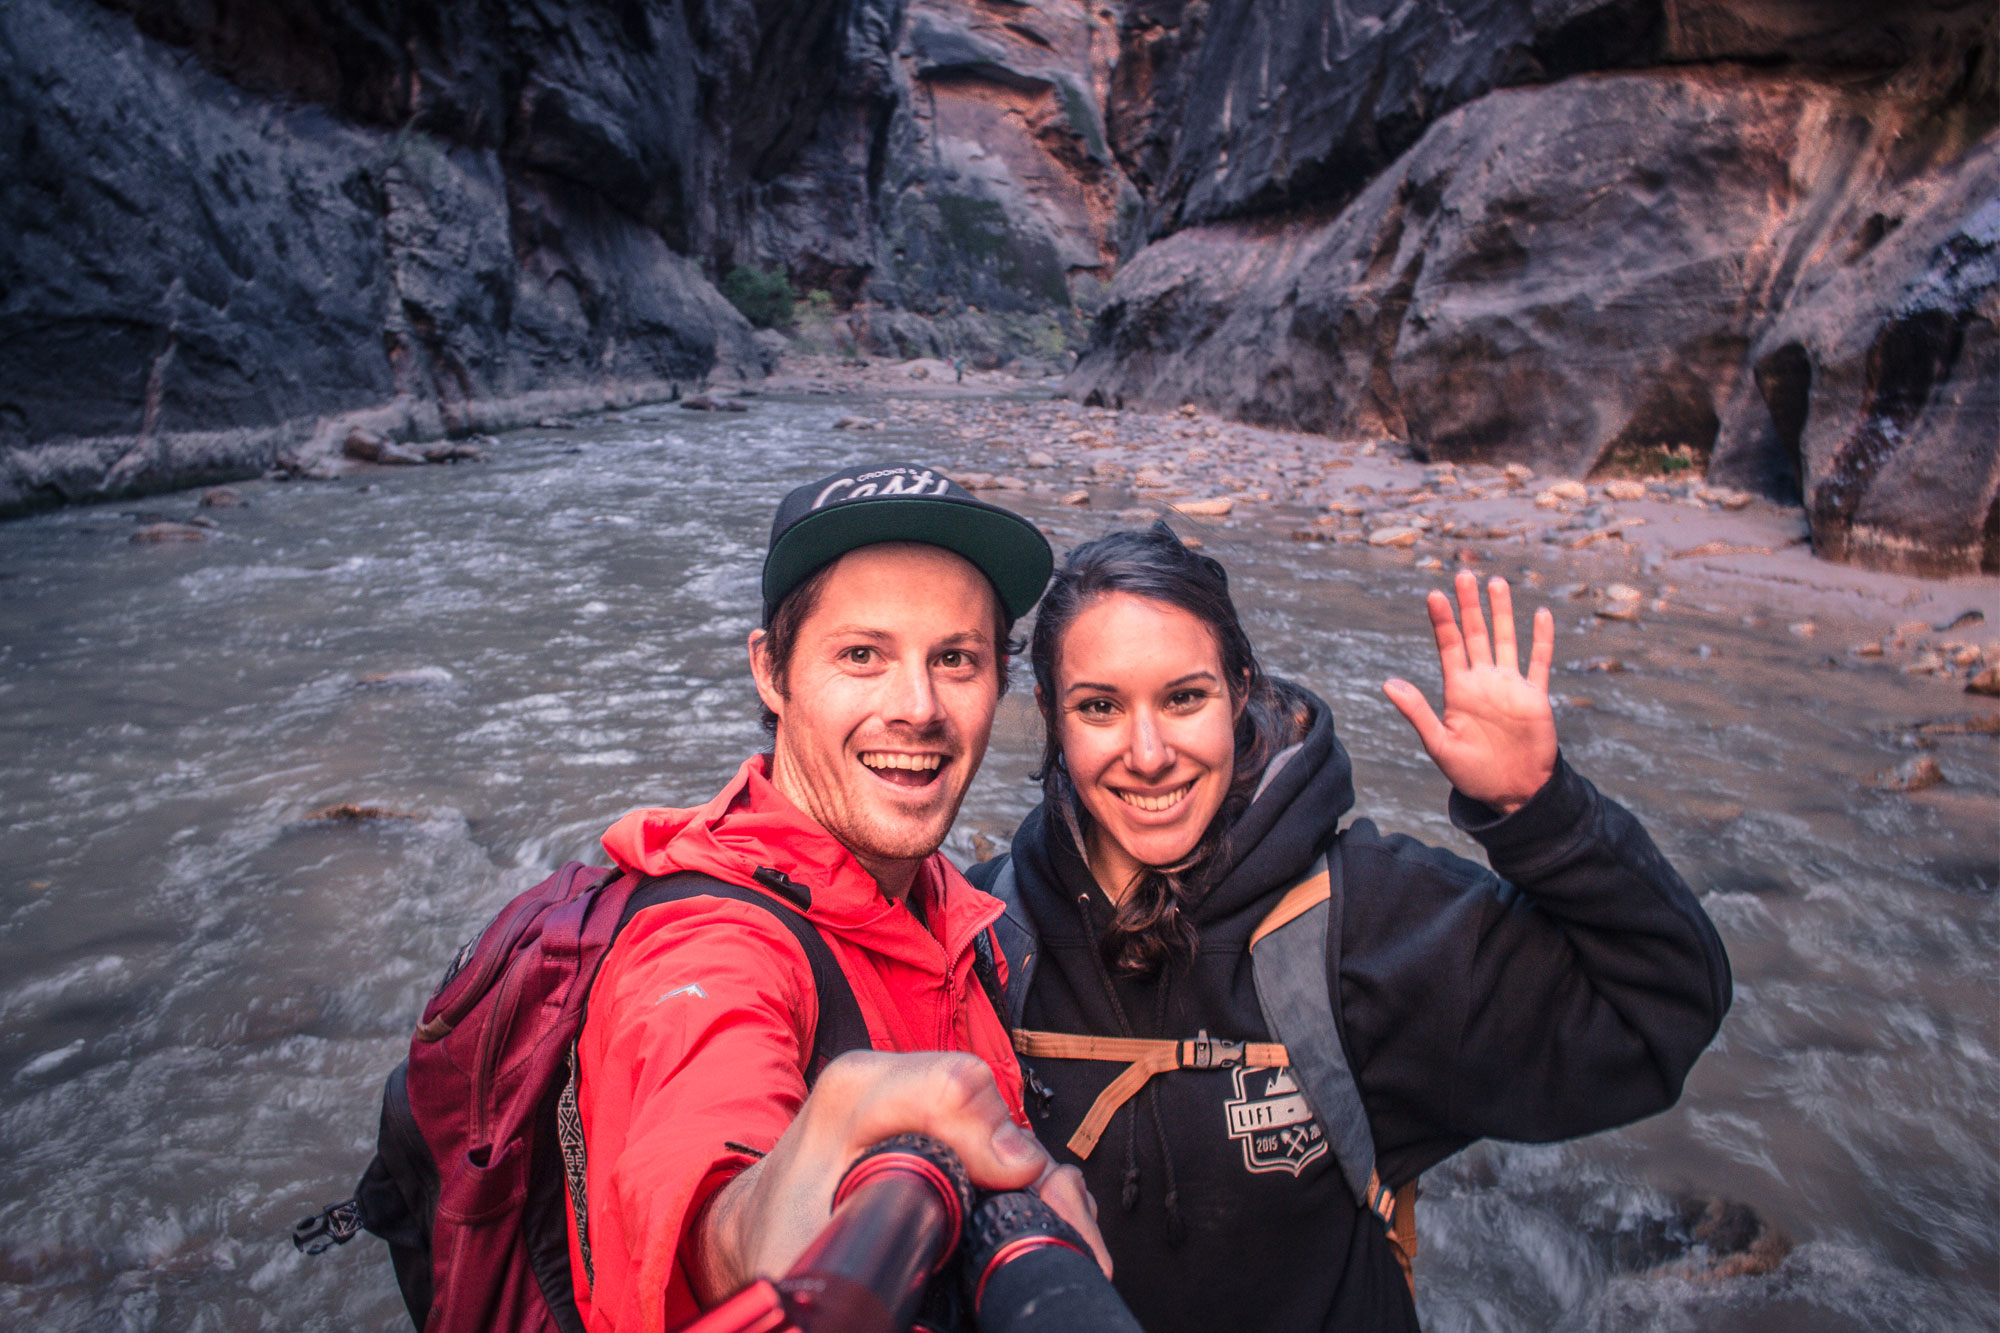 The Narrows, Number 2 on our list of best Zion National Park Hikes